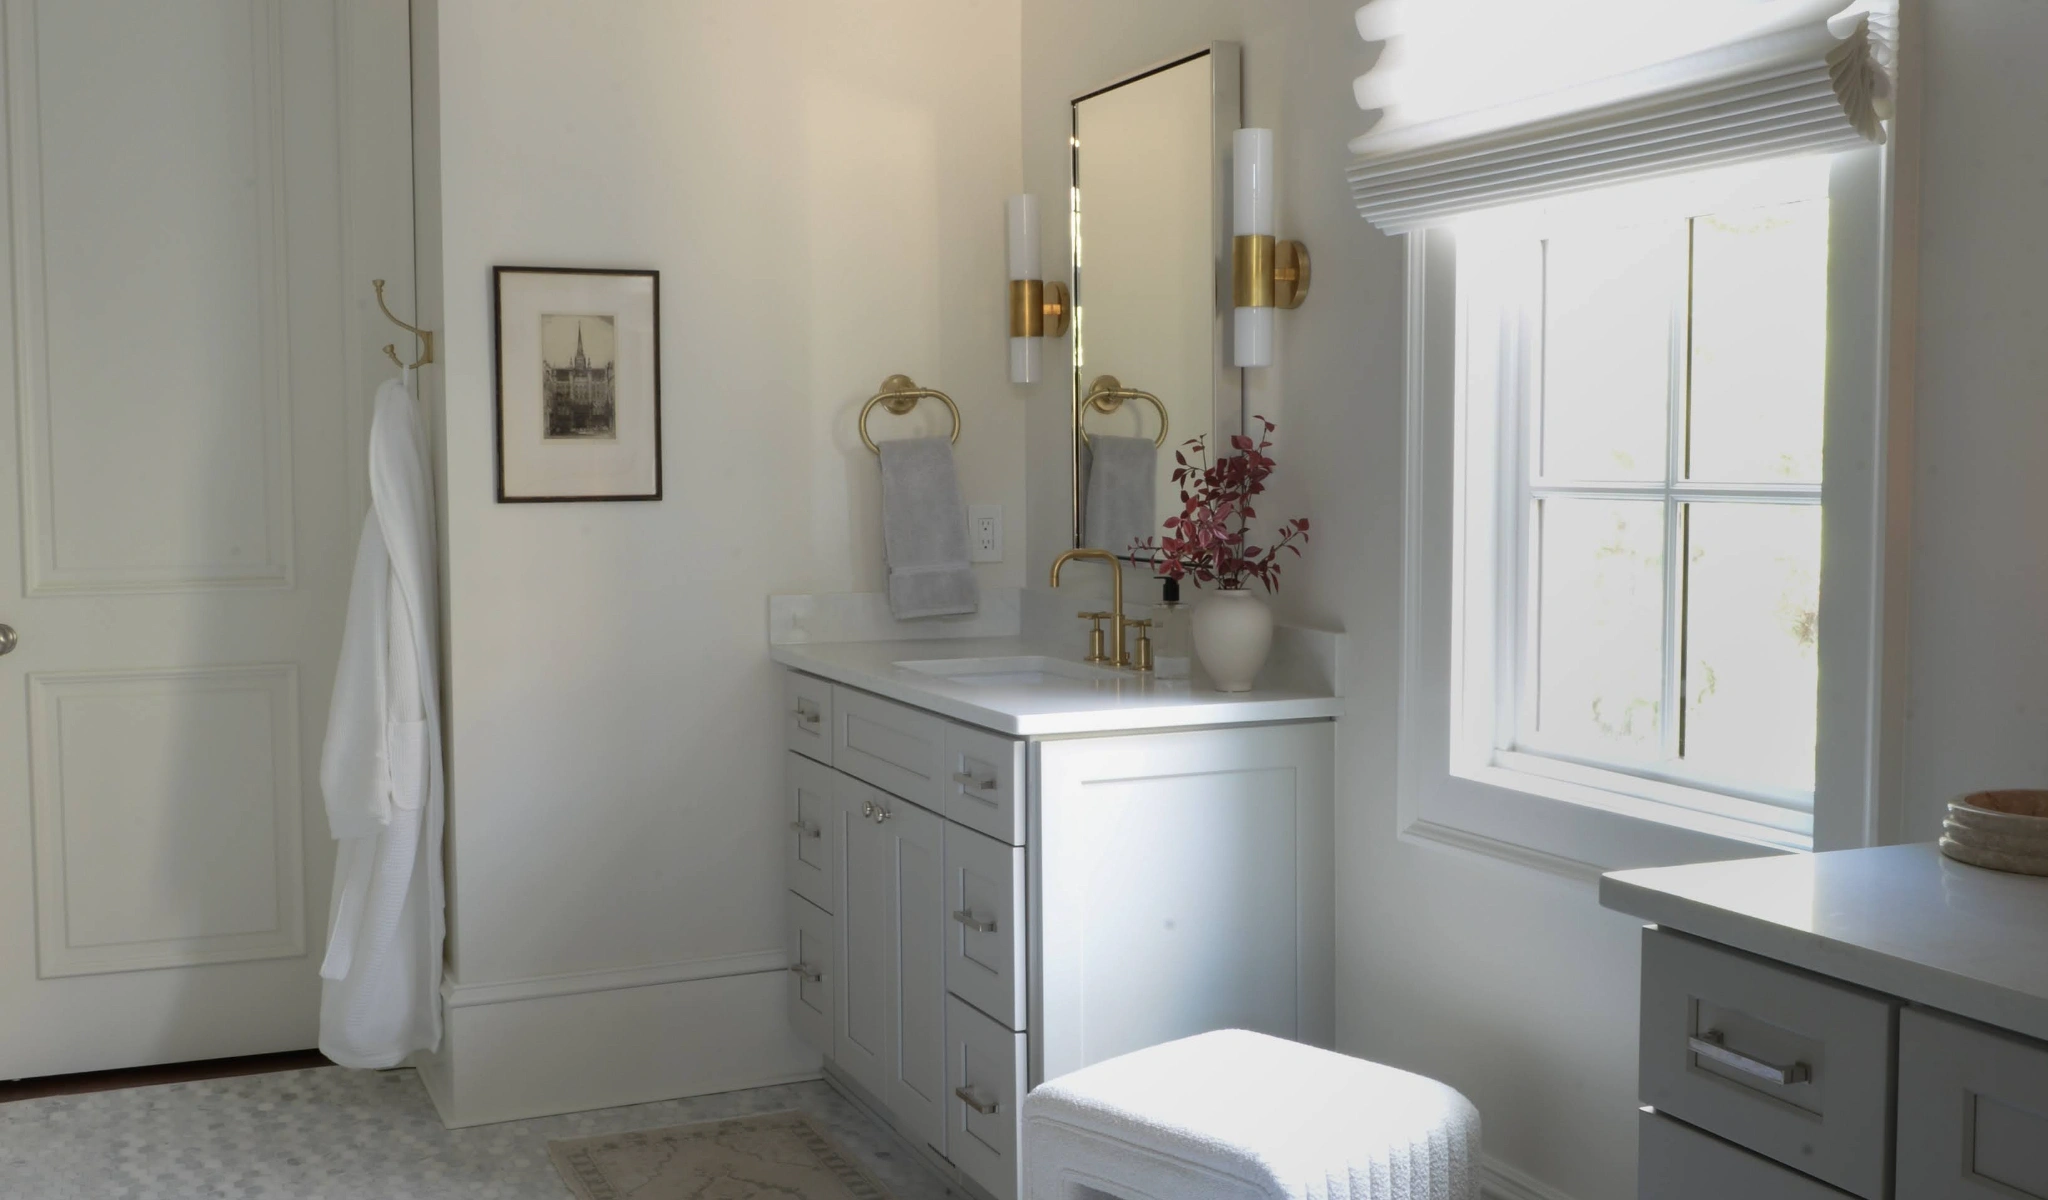 A bathroom with a white vanity and mirror in a new home construction.